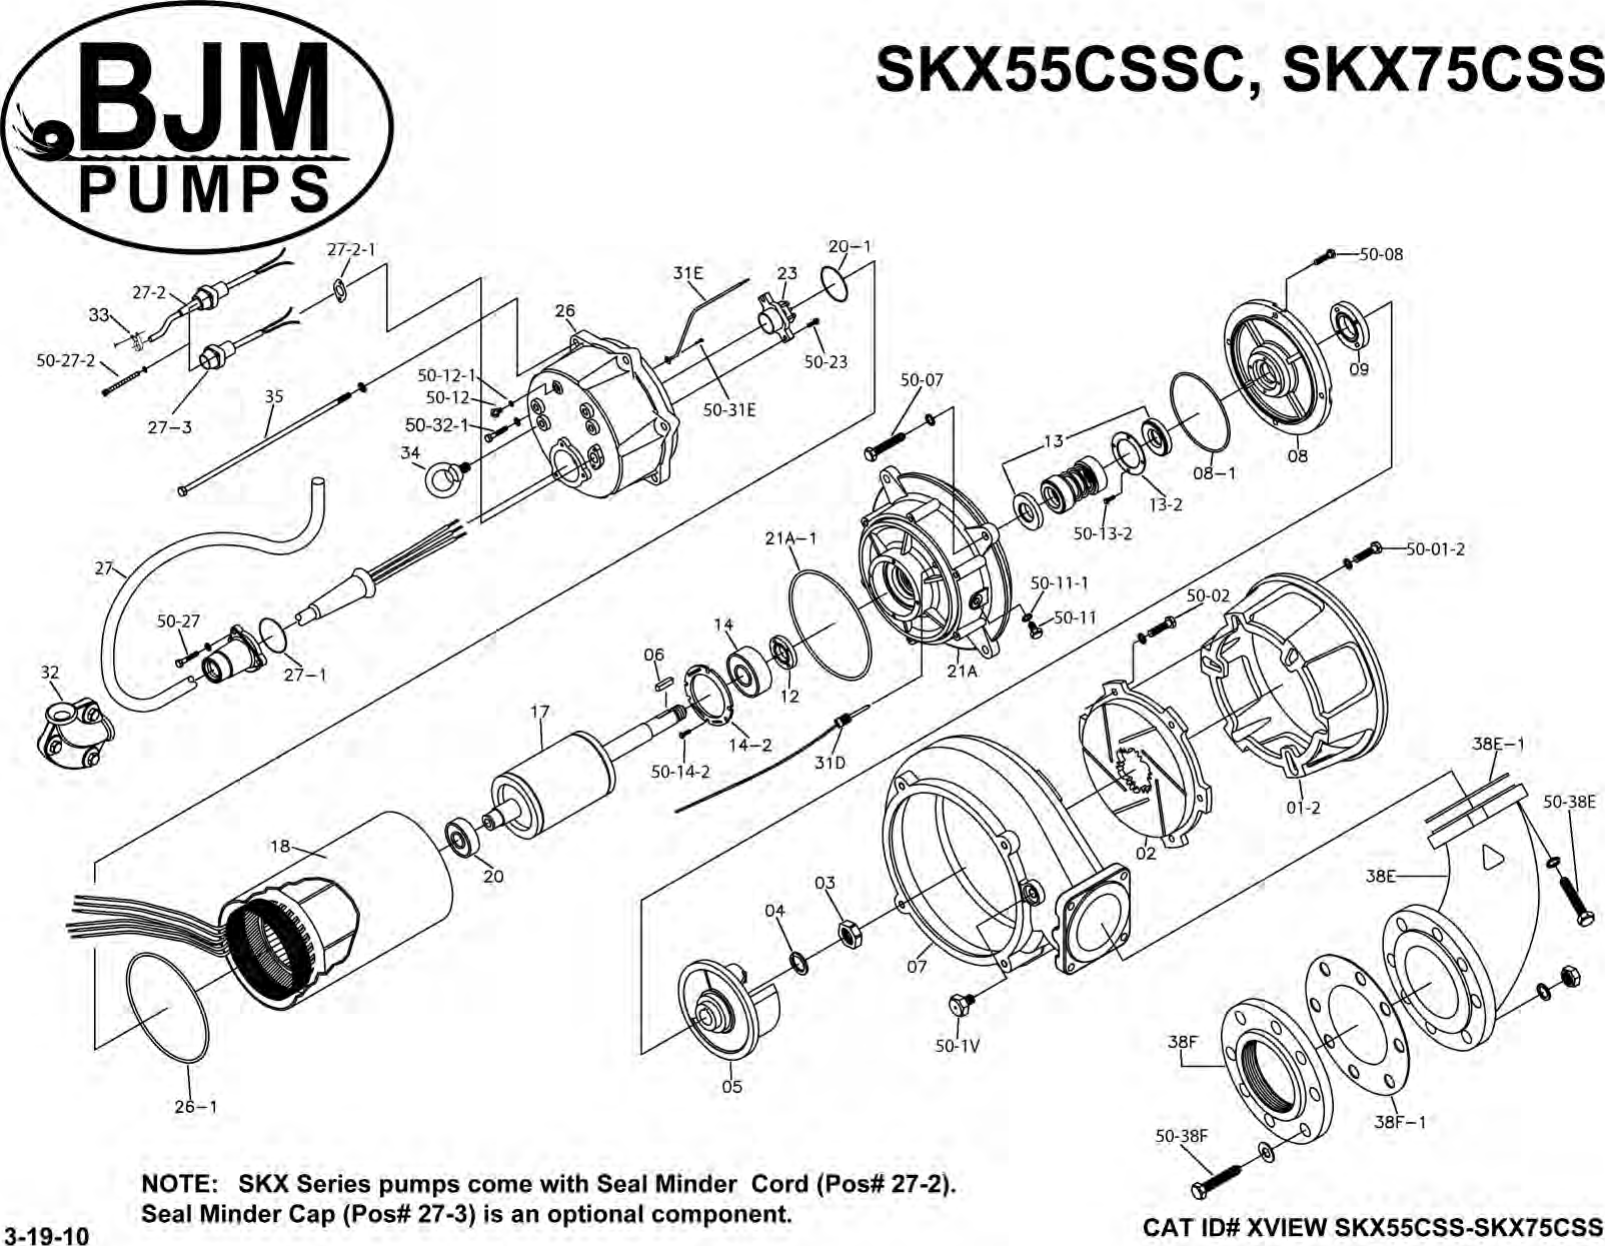 Page 4 of 5 - 136208 6 Bjm Skx Series Exploded View User Manual